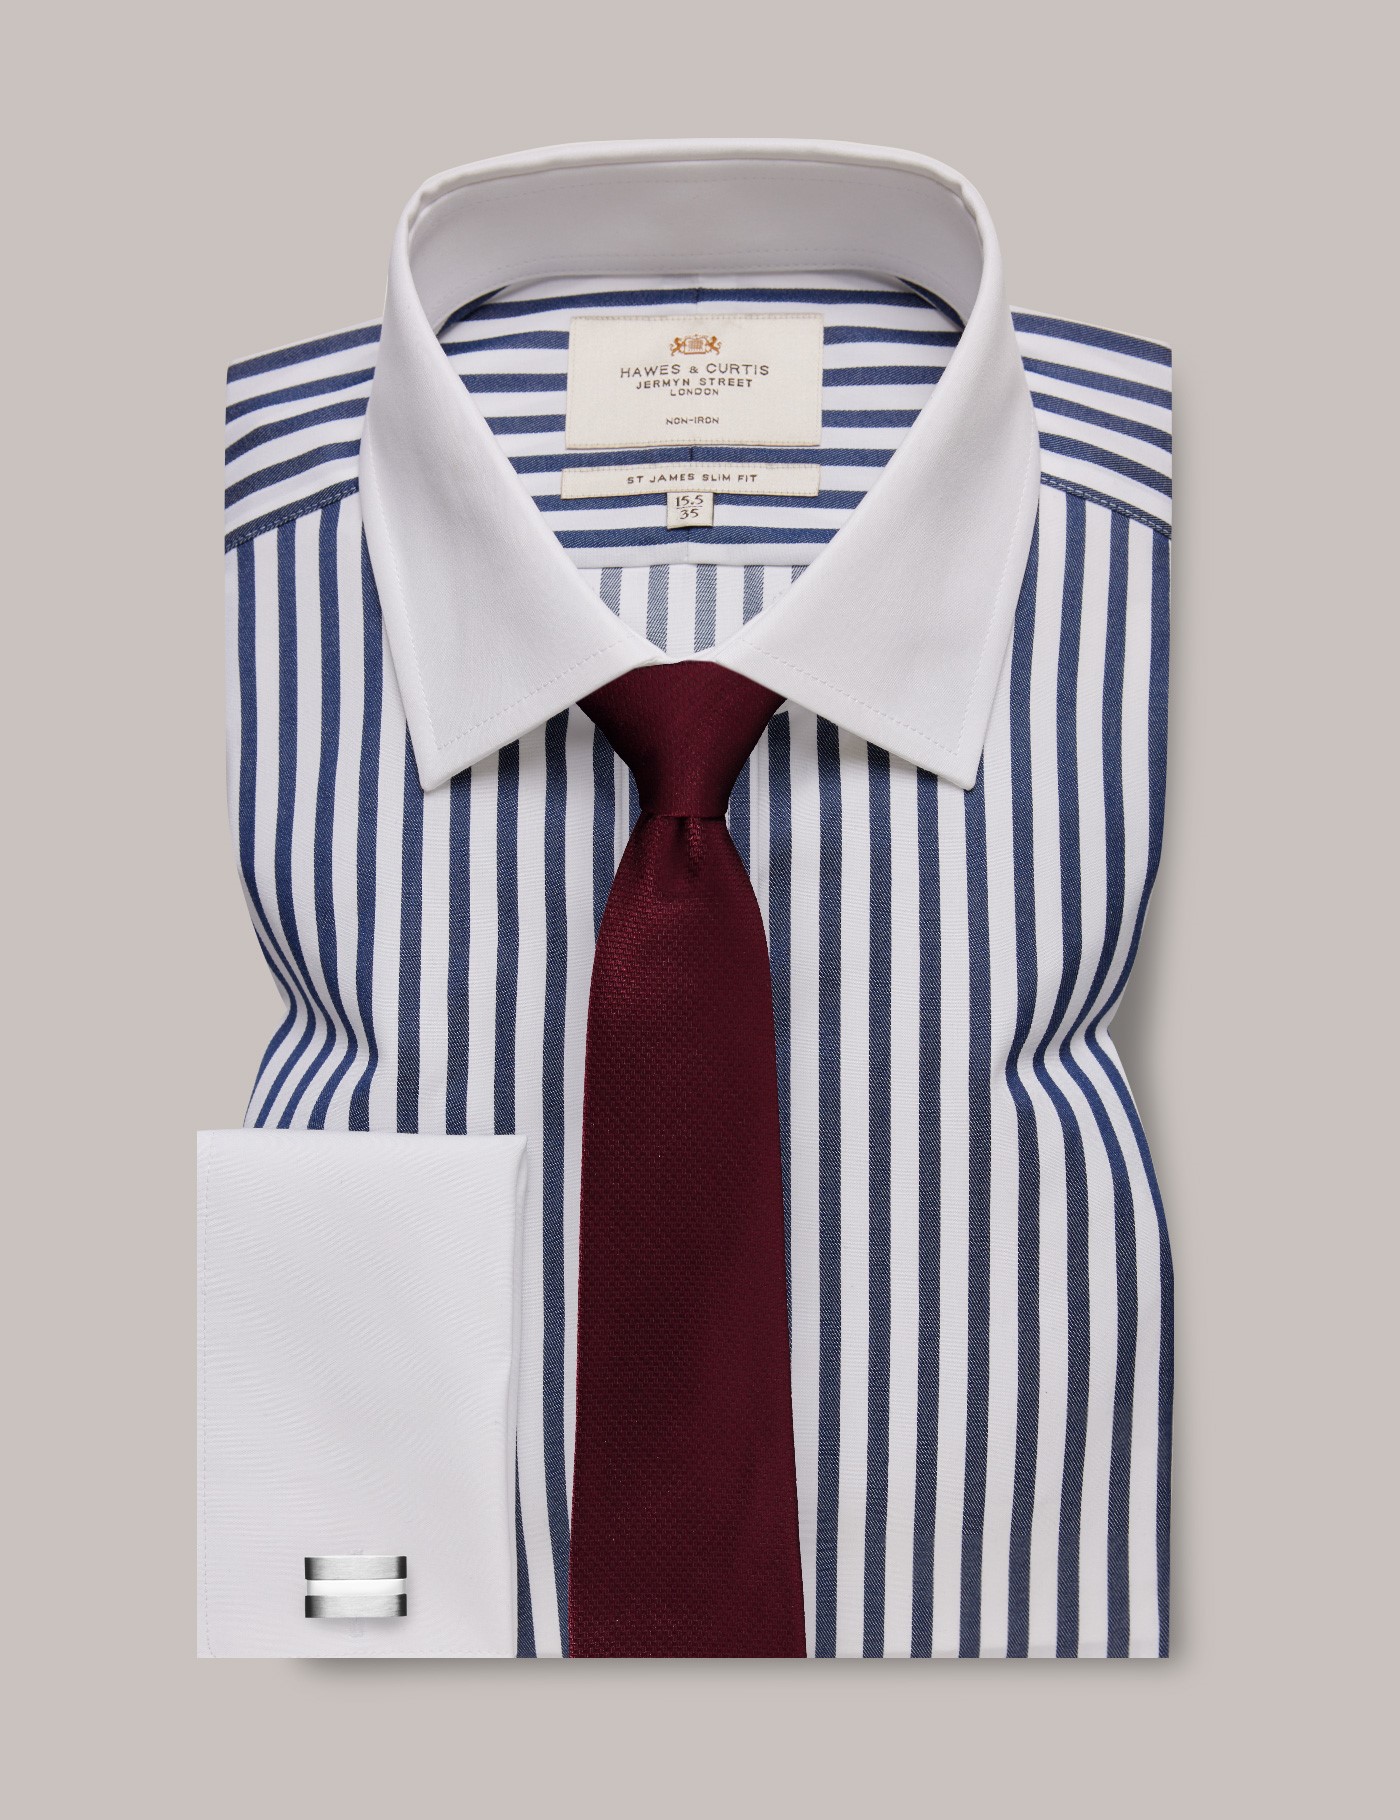 hawes & curtis non-iron navy & white bold stripe slim shirt with white collar and cuffs